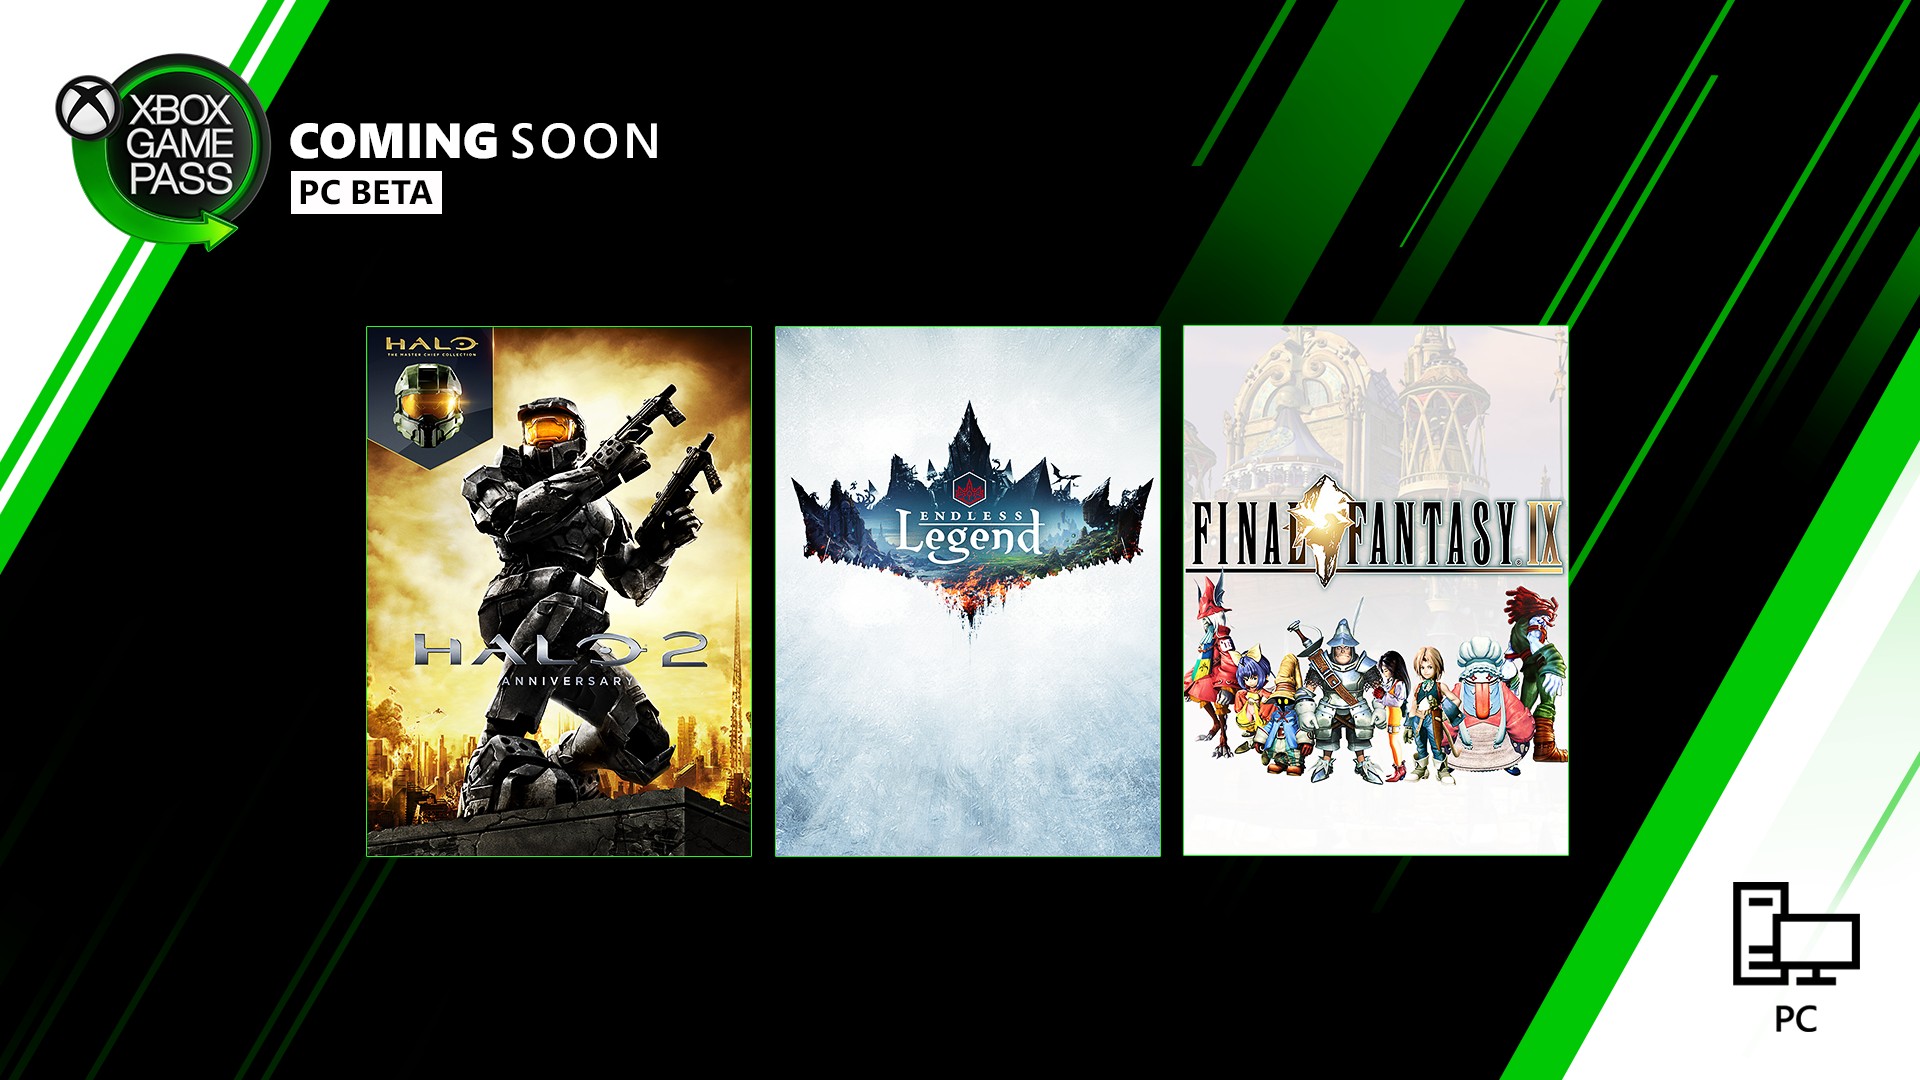 Xbox Game Pass - PC Coming Soon